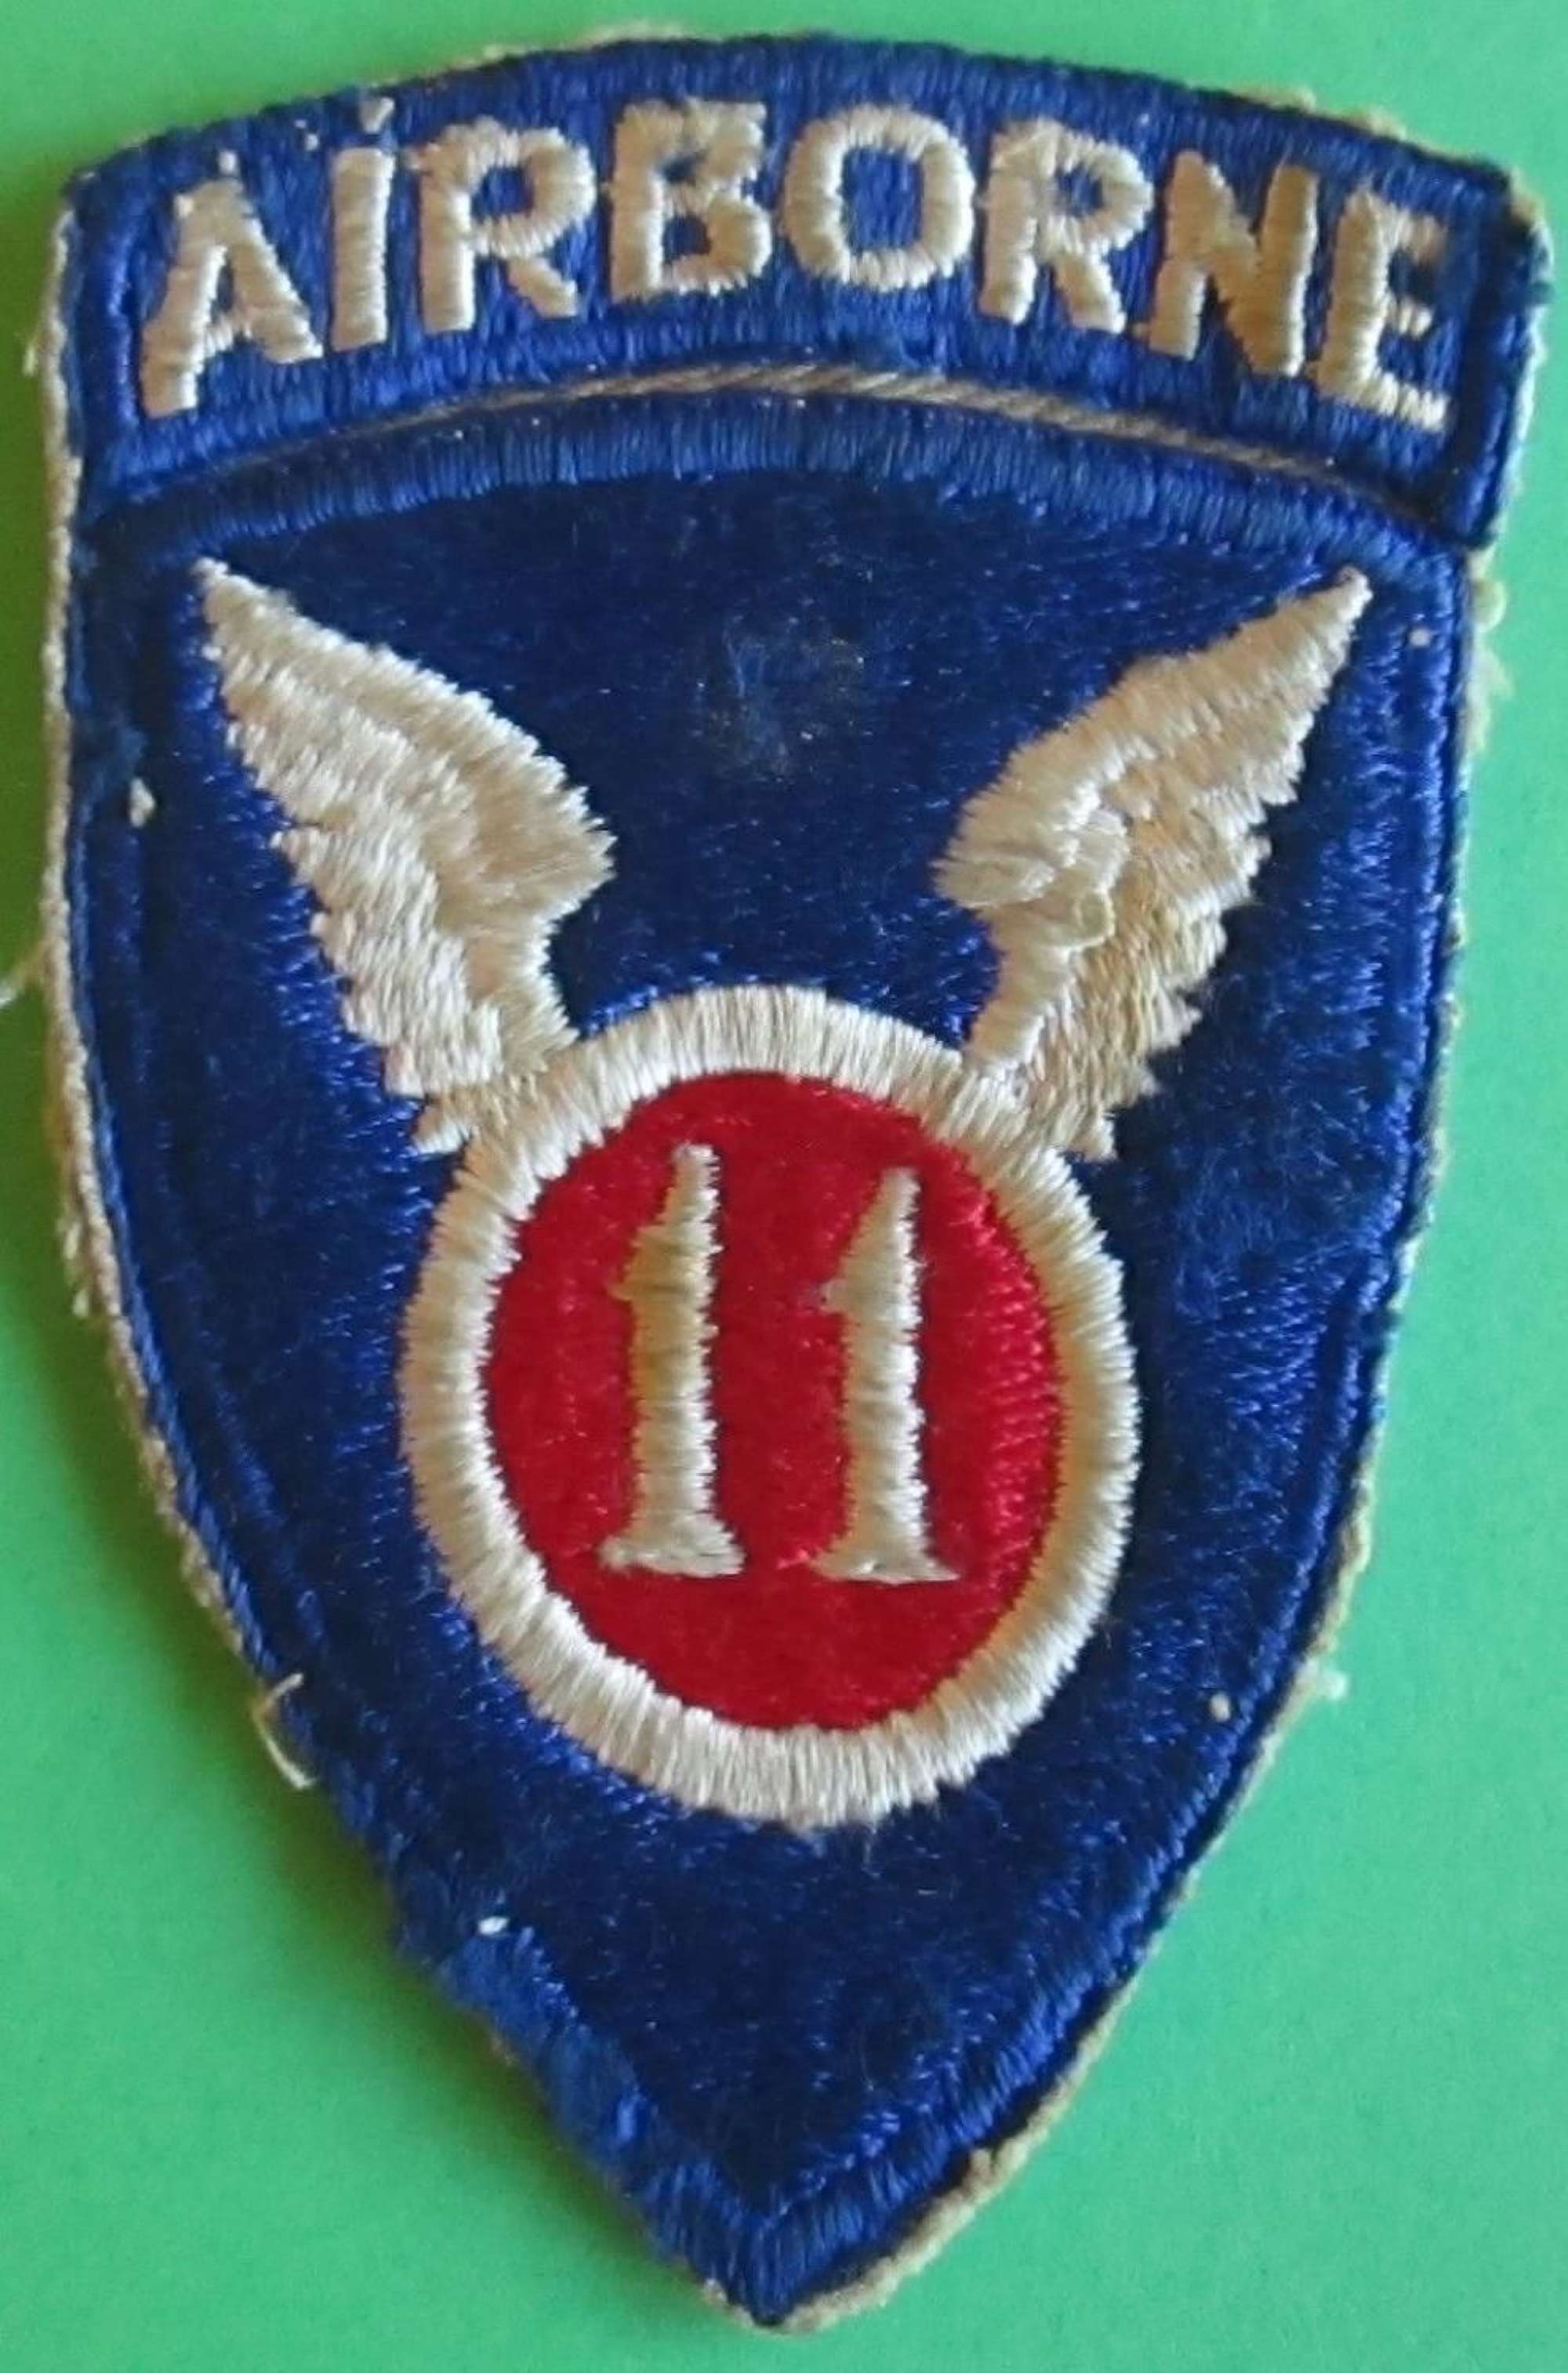 A 1 PIECE CONSTRUCTED US 11TH AIRBORNE FORCE ARM BADGE